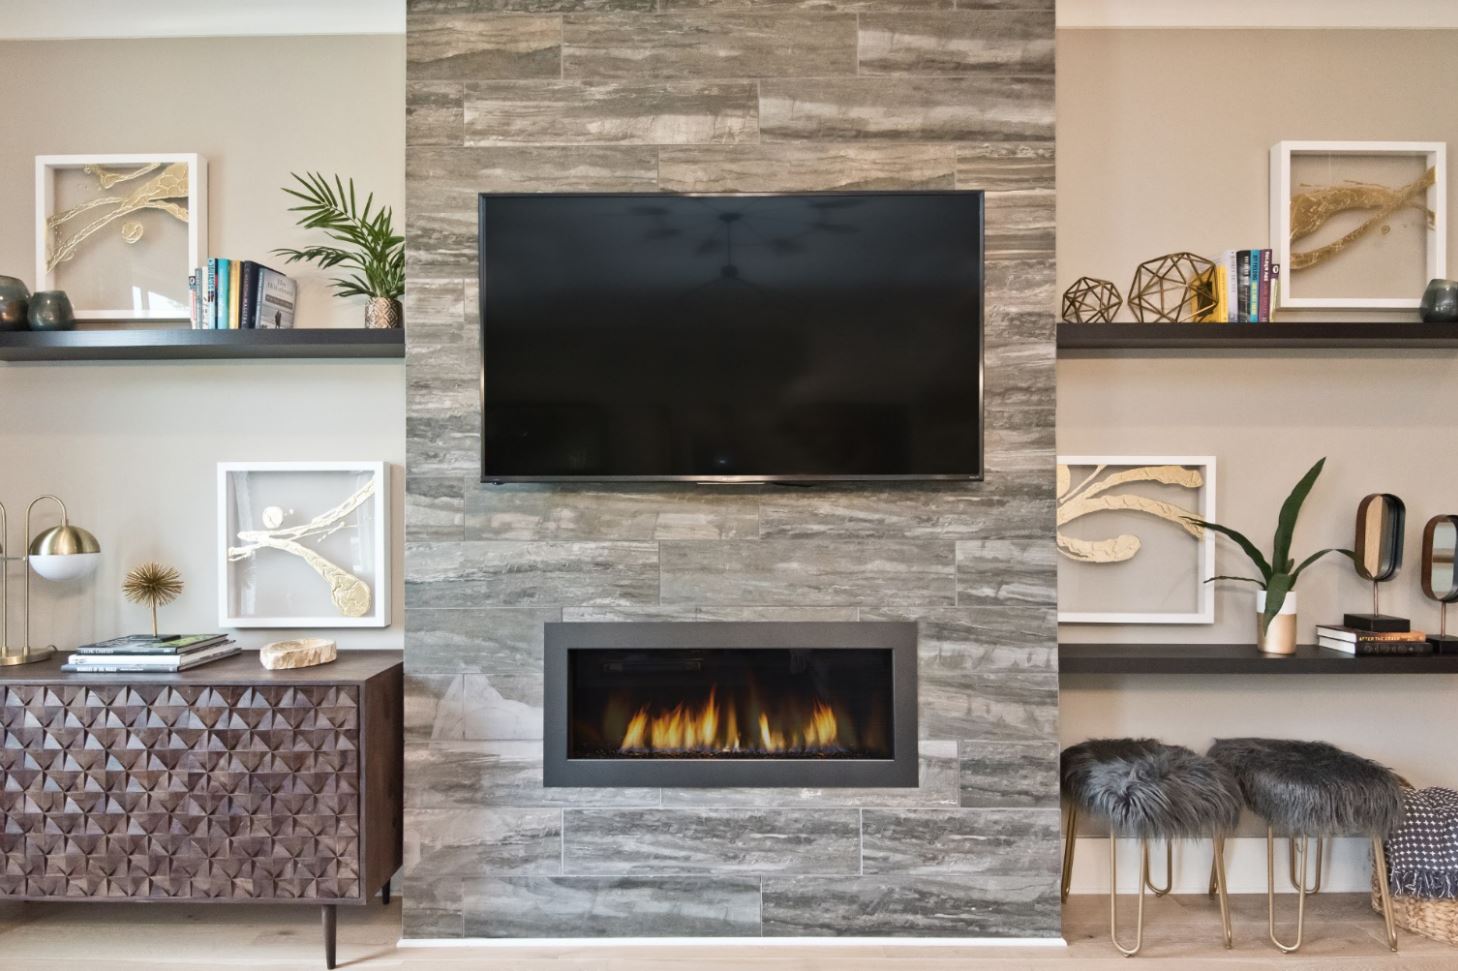 Sleek accents and modern built-ins surrounding your fireplace add functionality and style.